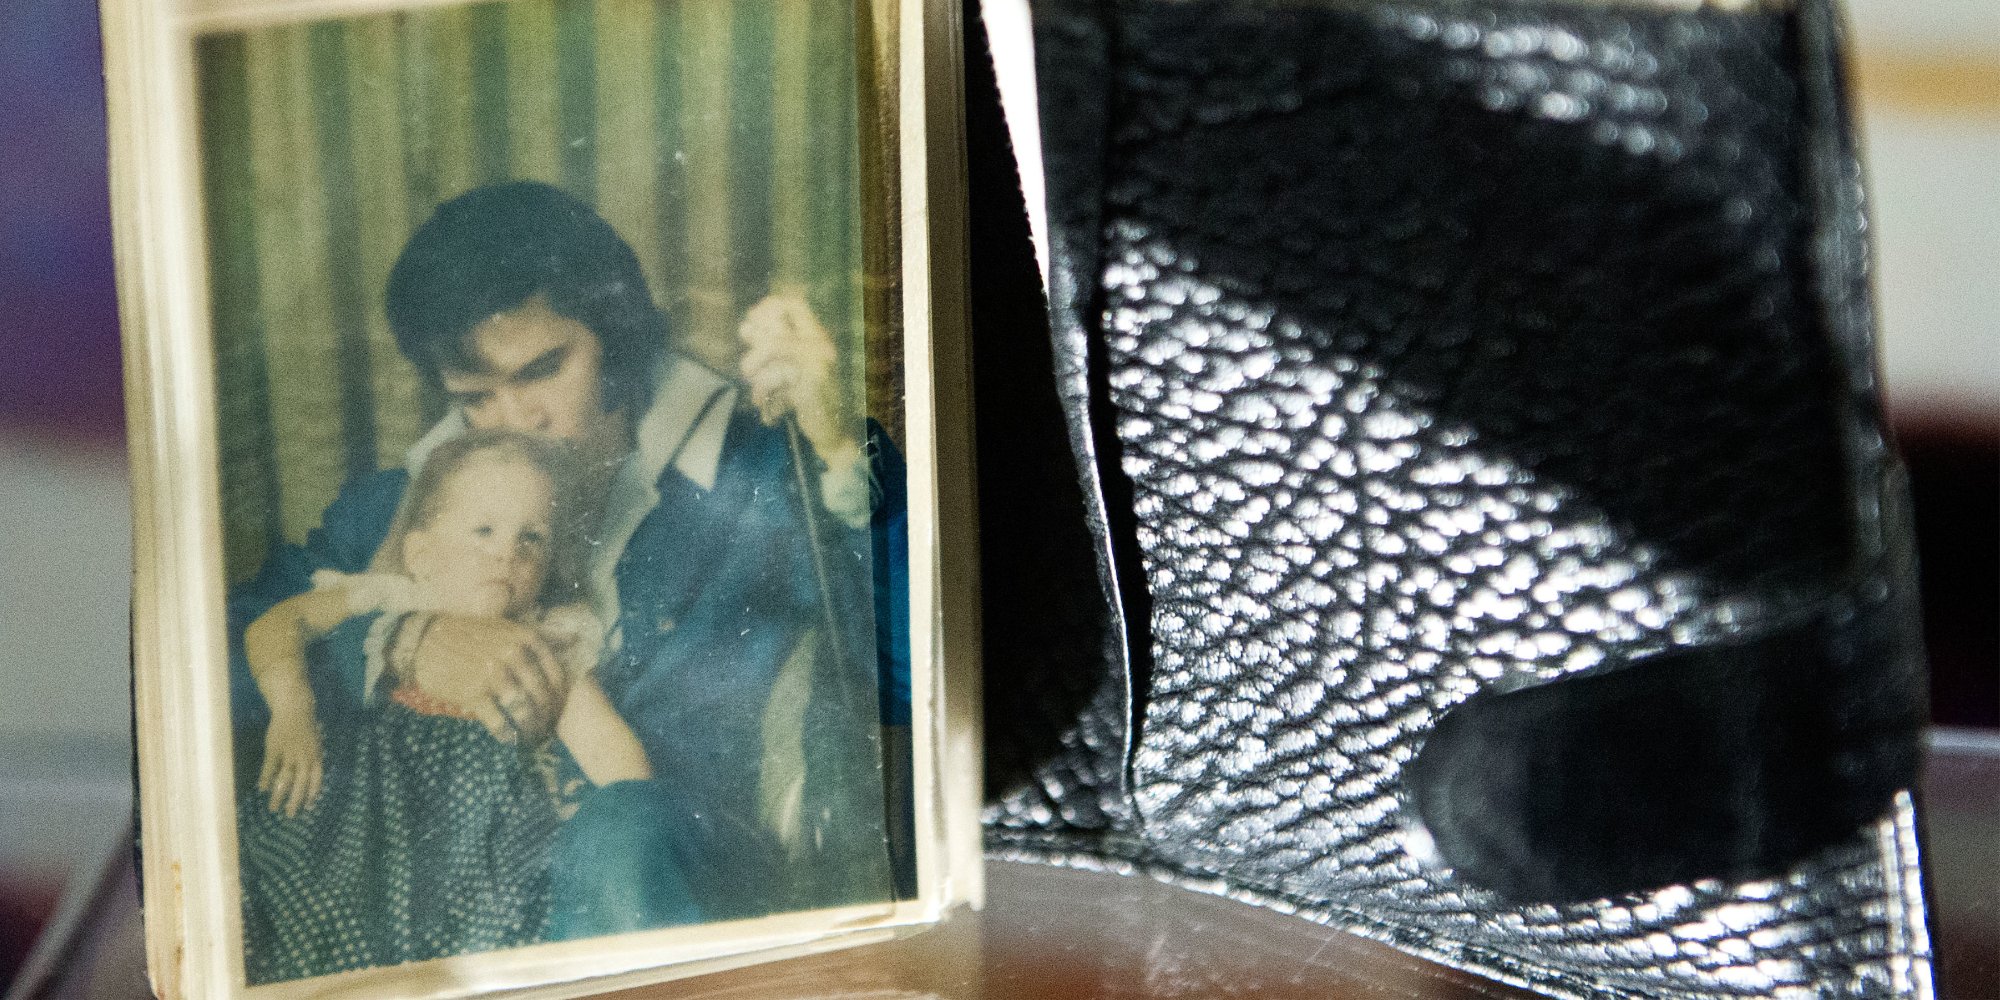 Lisa Marie Presley and Elvis Presley's photograph in a wallet on display at Graceland.